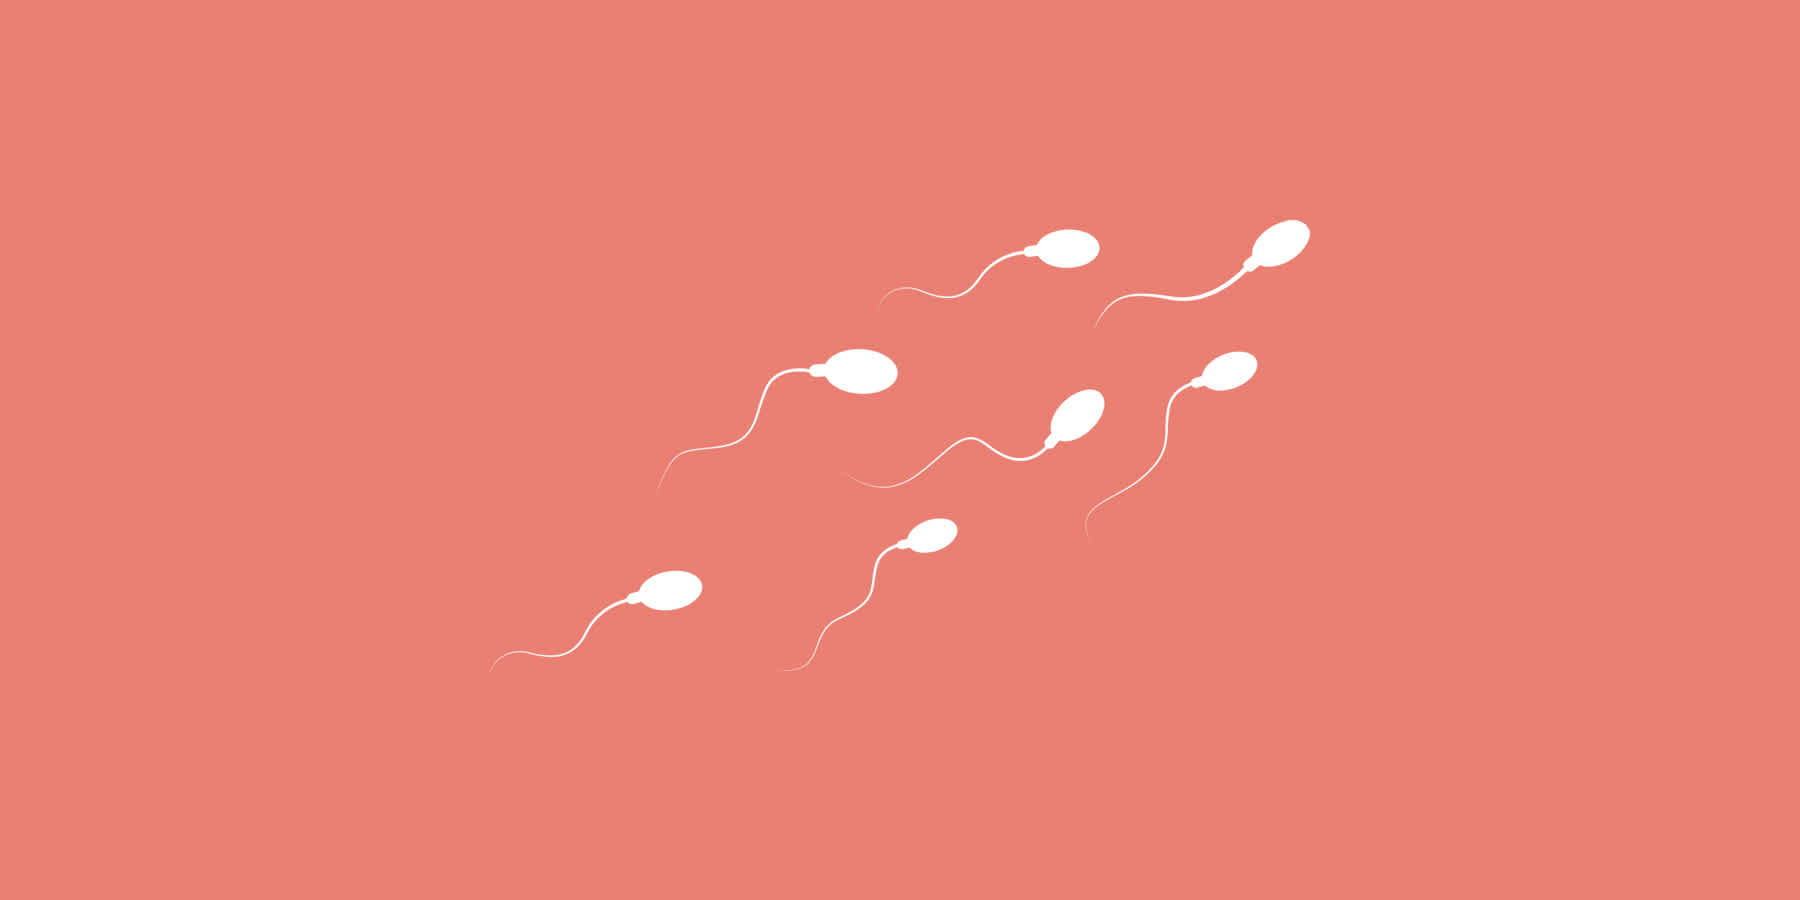 Illustration of gonorrhea cells against a light red background